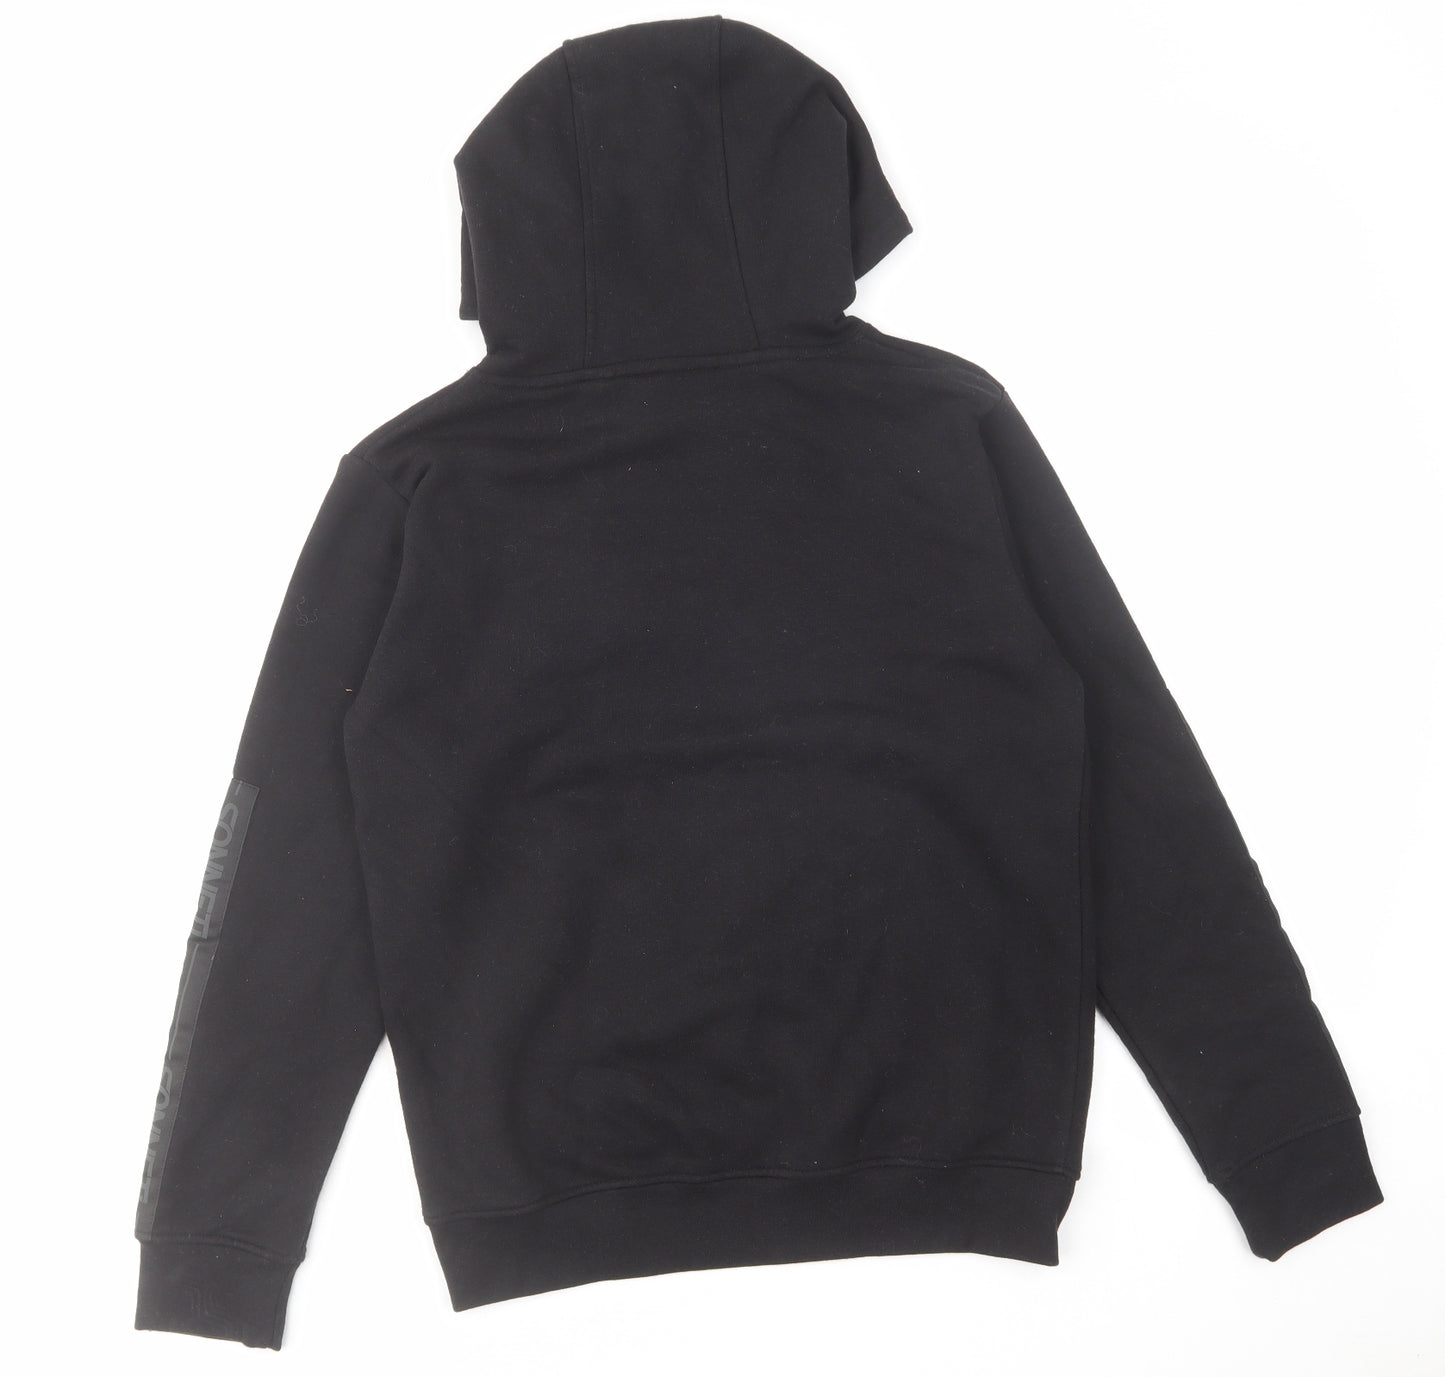 Sonneti Boys Black Cotton Pullover Hoodie Size 12-13 Years Pullover